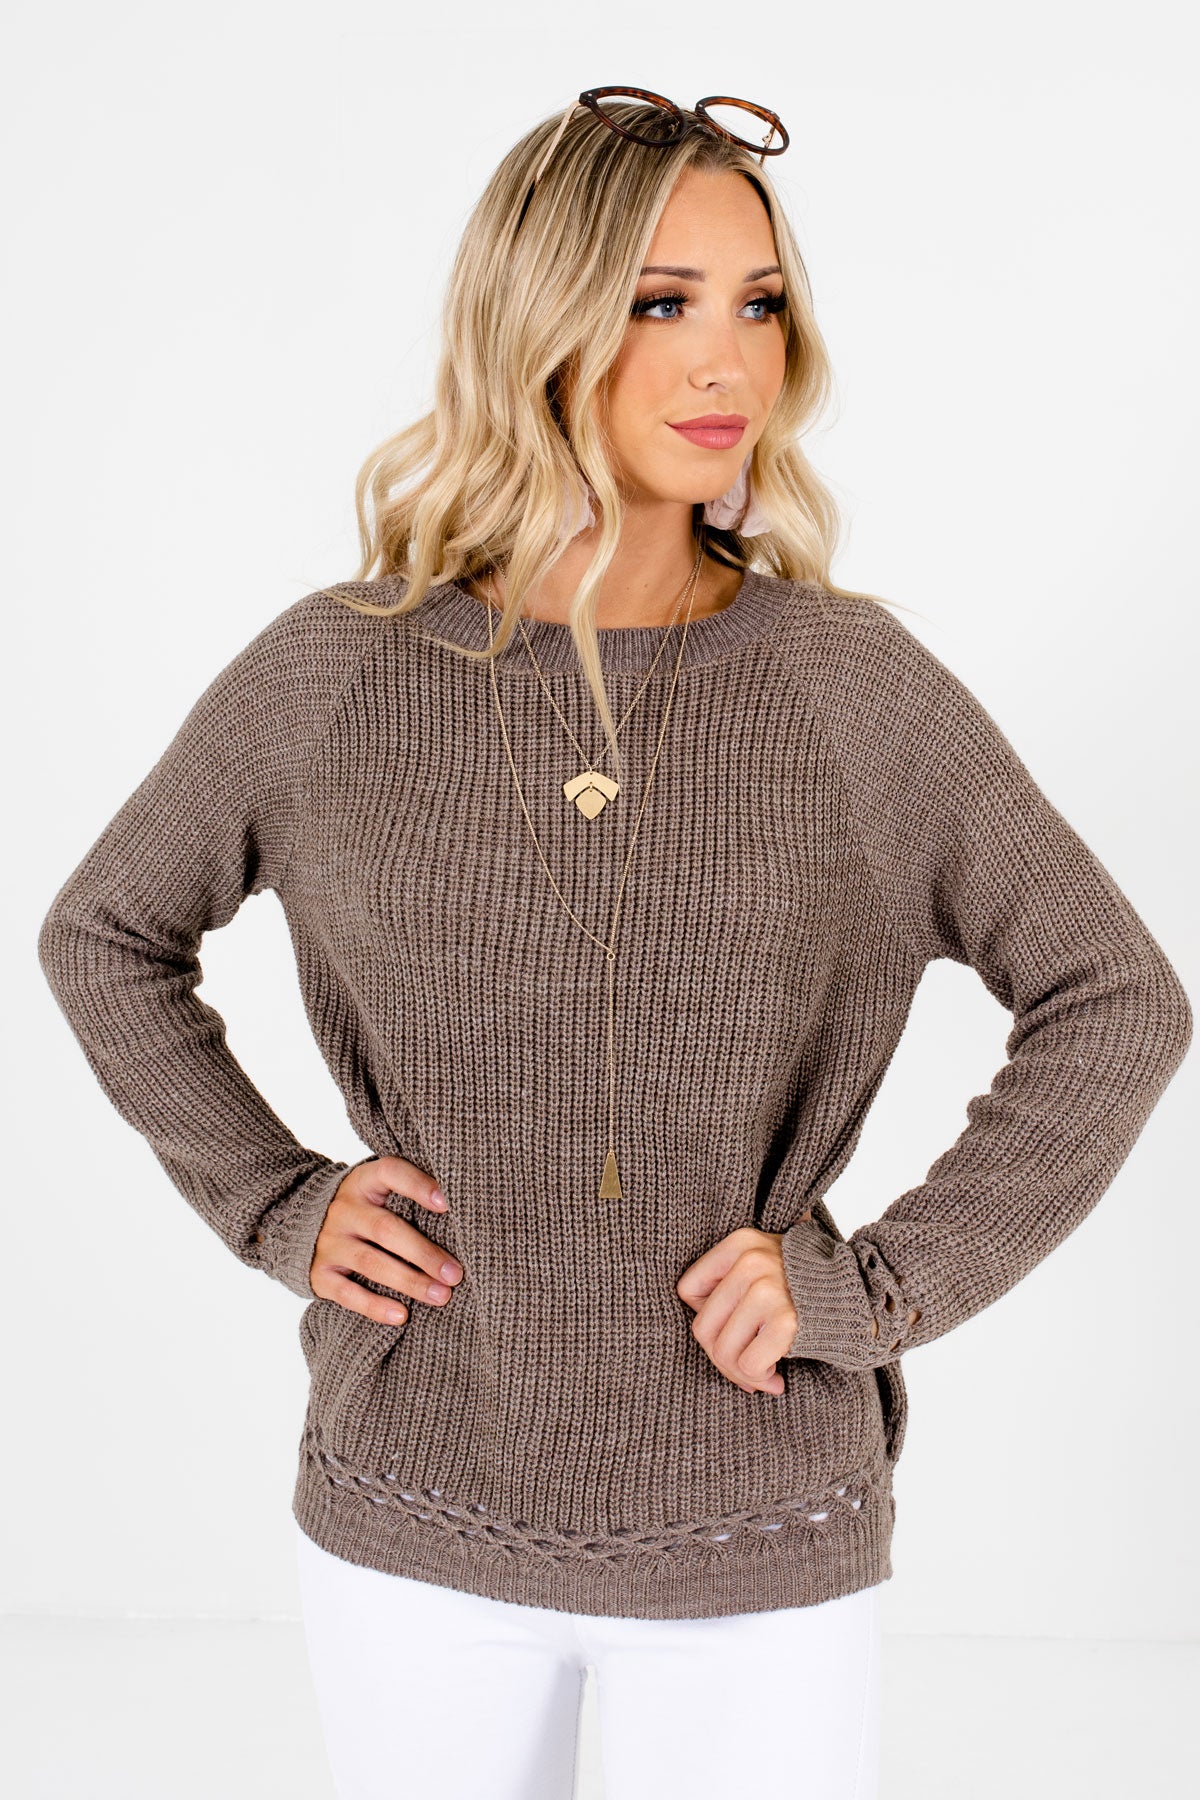 Mocha Brown High-Quality Knit Material Boutique Sweaters for Women